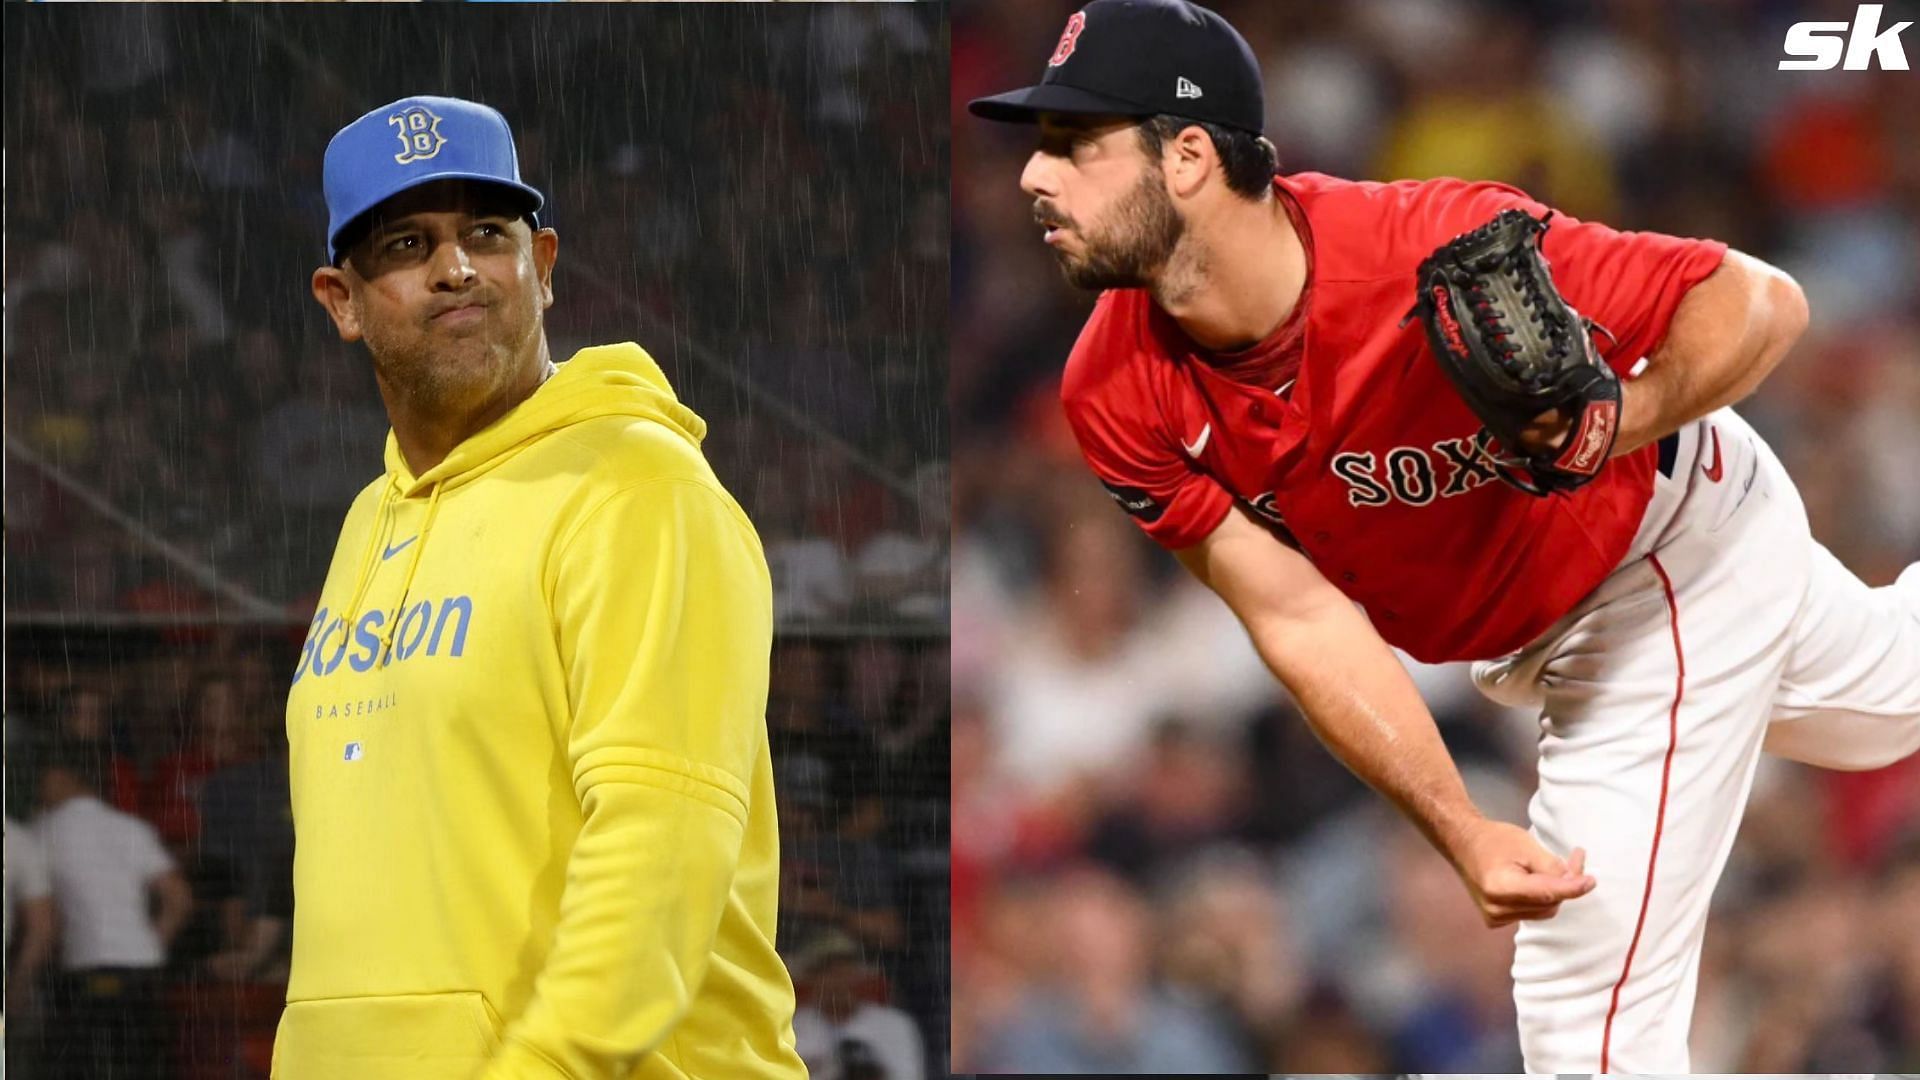 Under-fire Red Sox manager Alex Cora enrages MLB analyst after persisting with struggling Kyle Barraclough against Astros